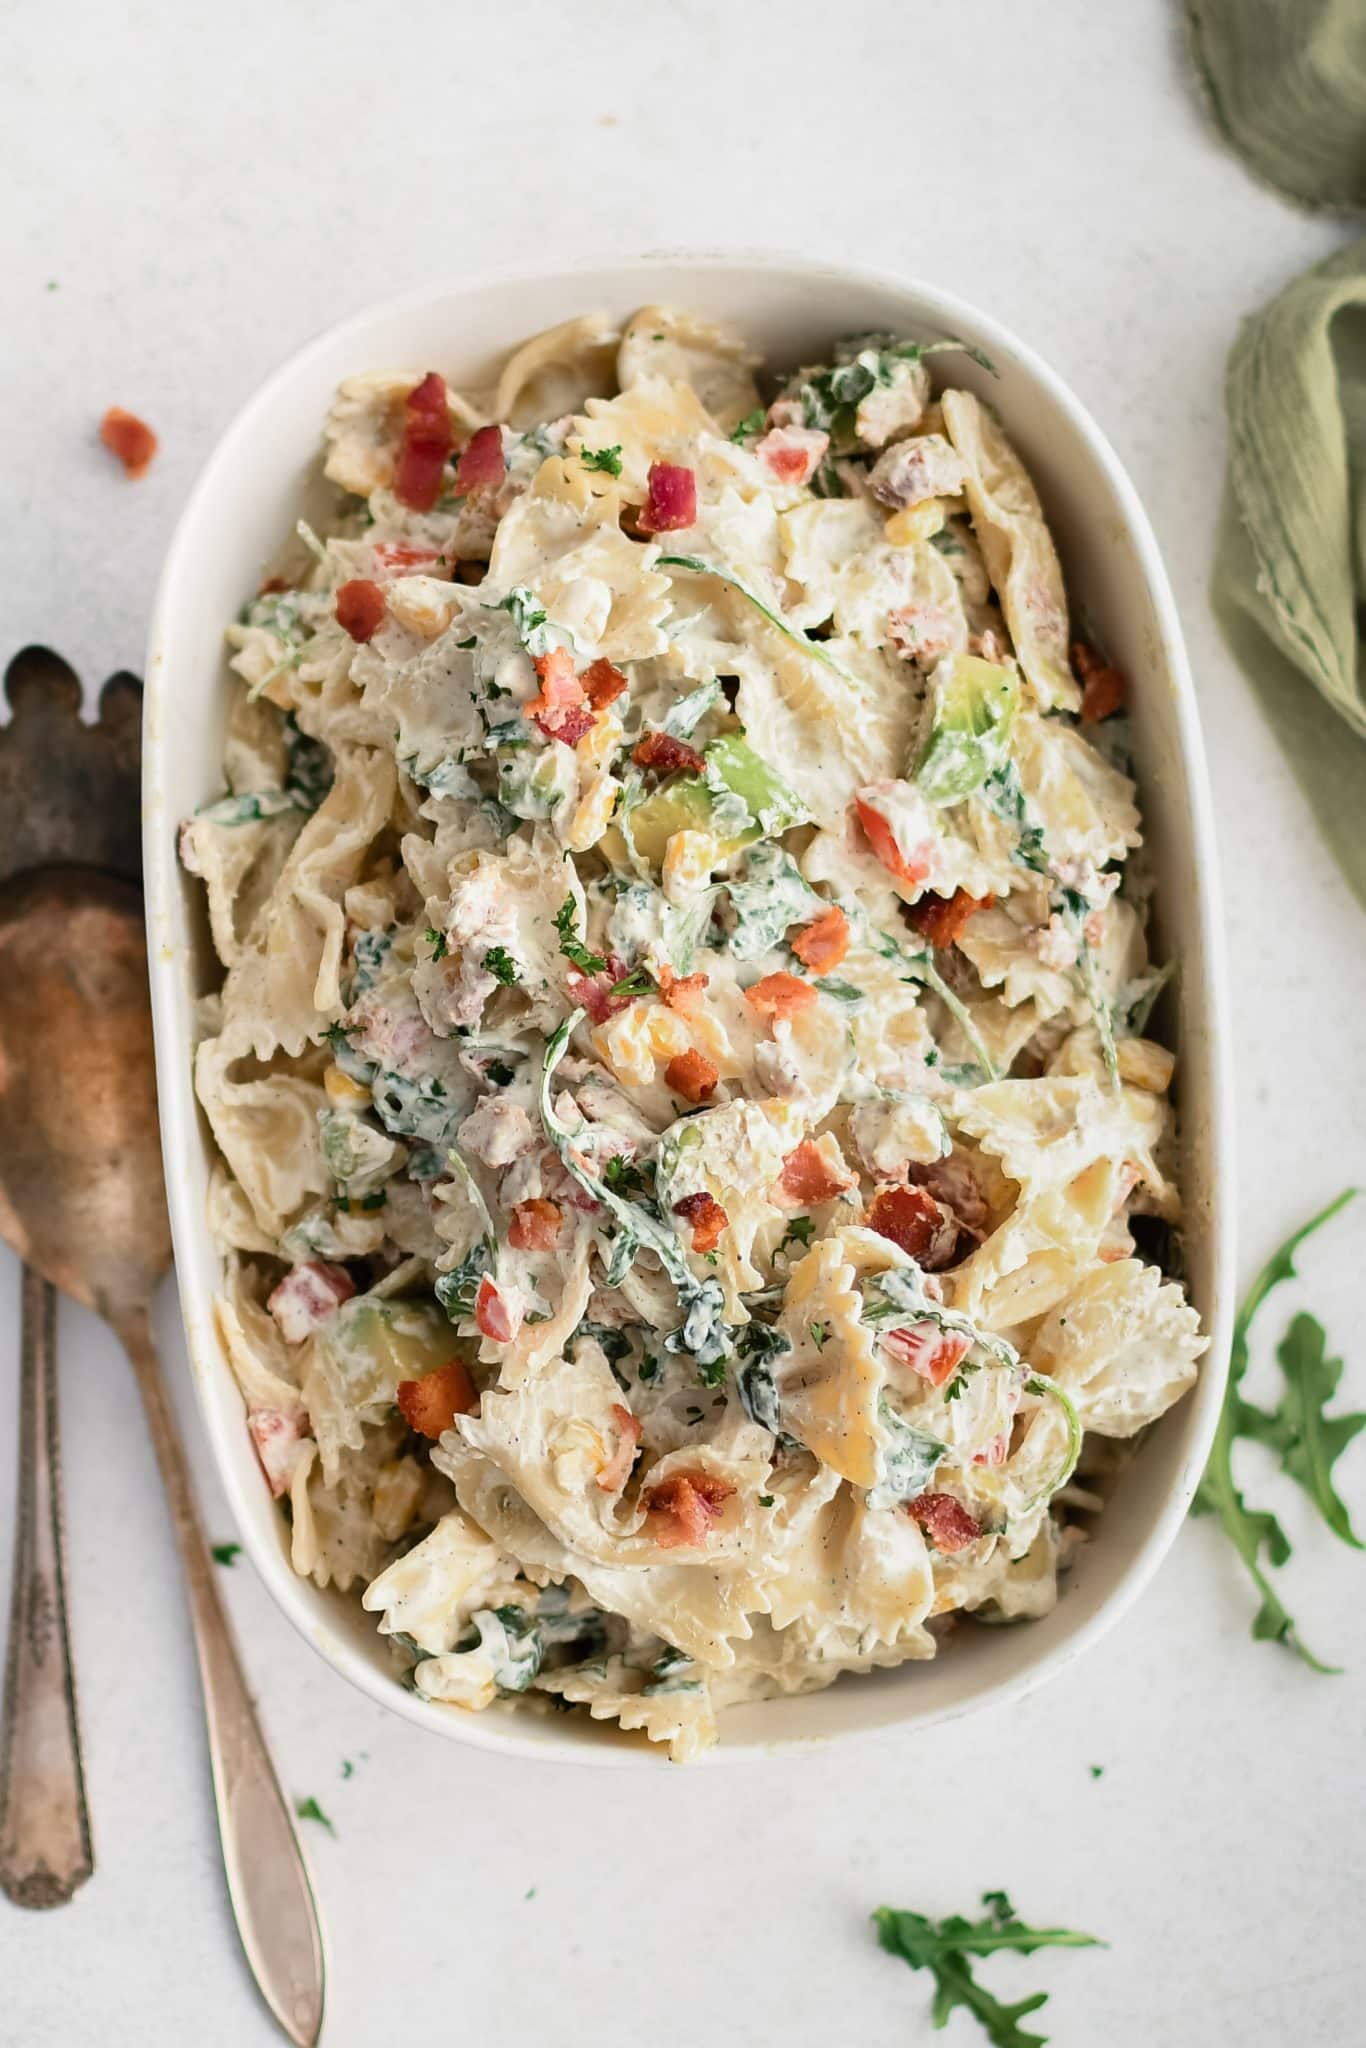 Large oval serving plate filled with creamy BLT pasta salad made with bowtie pasta, arugula, avocado, tomato, bacon, and corn in a creamy mayo and sour cream dressing.